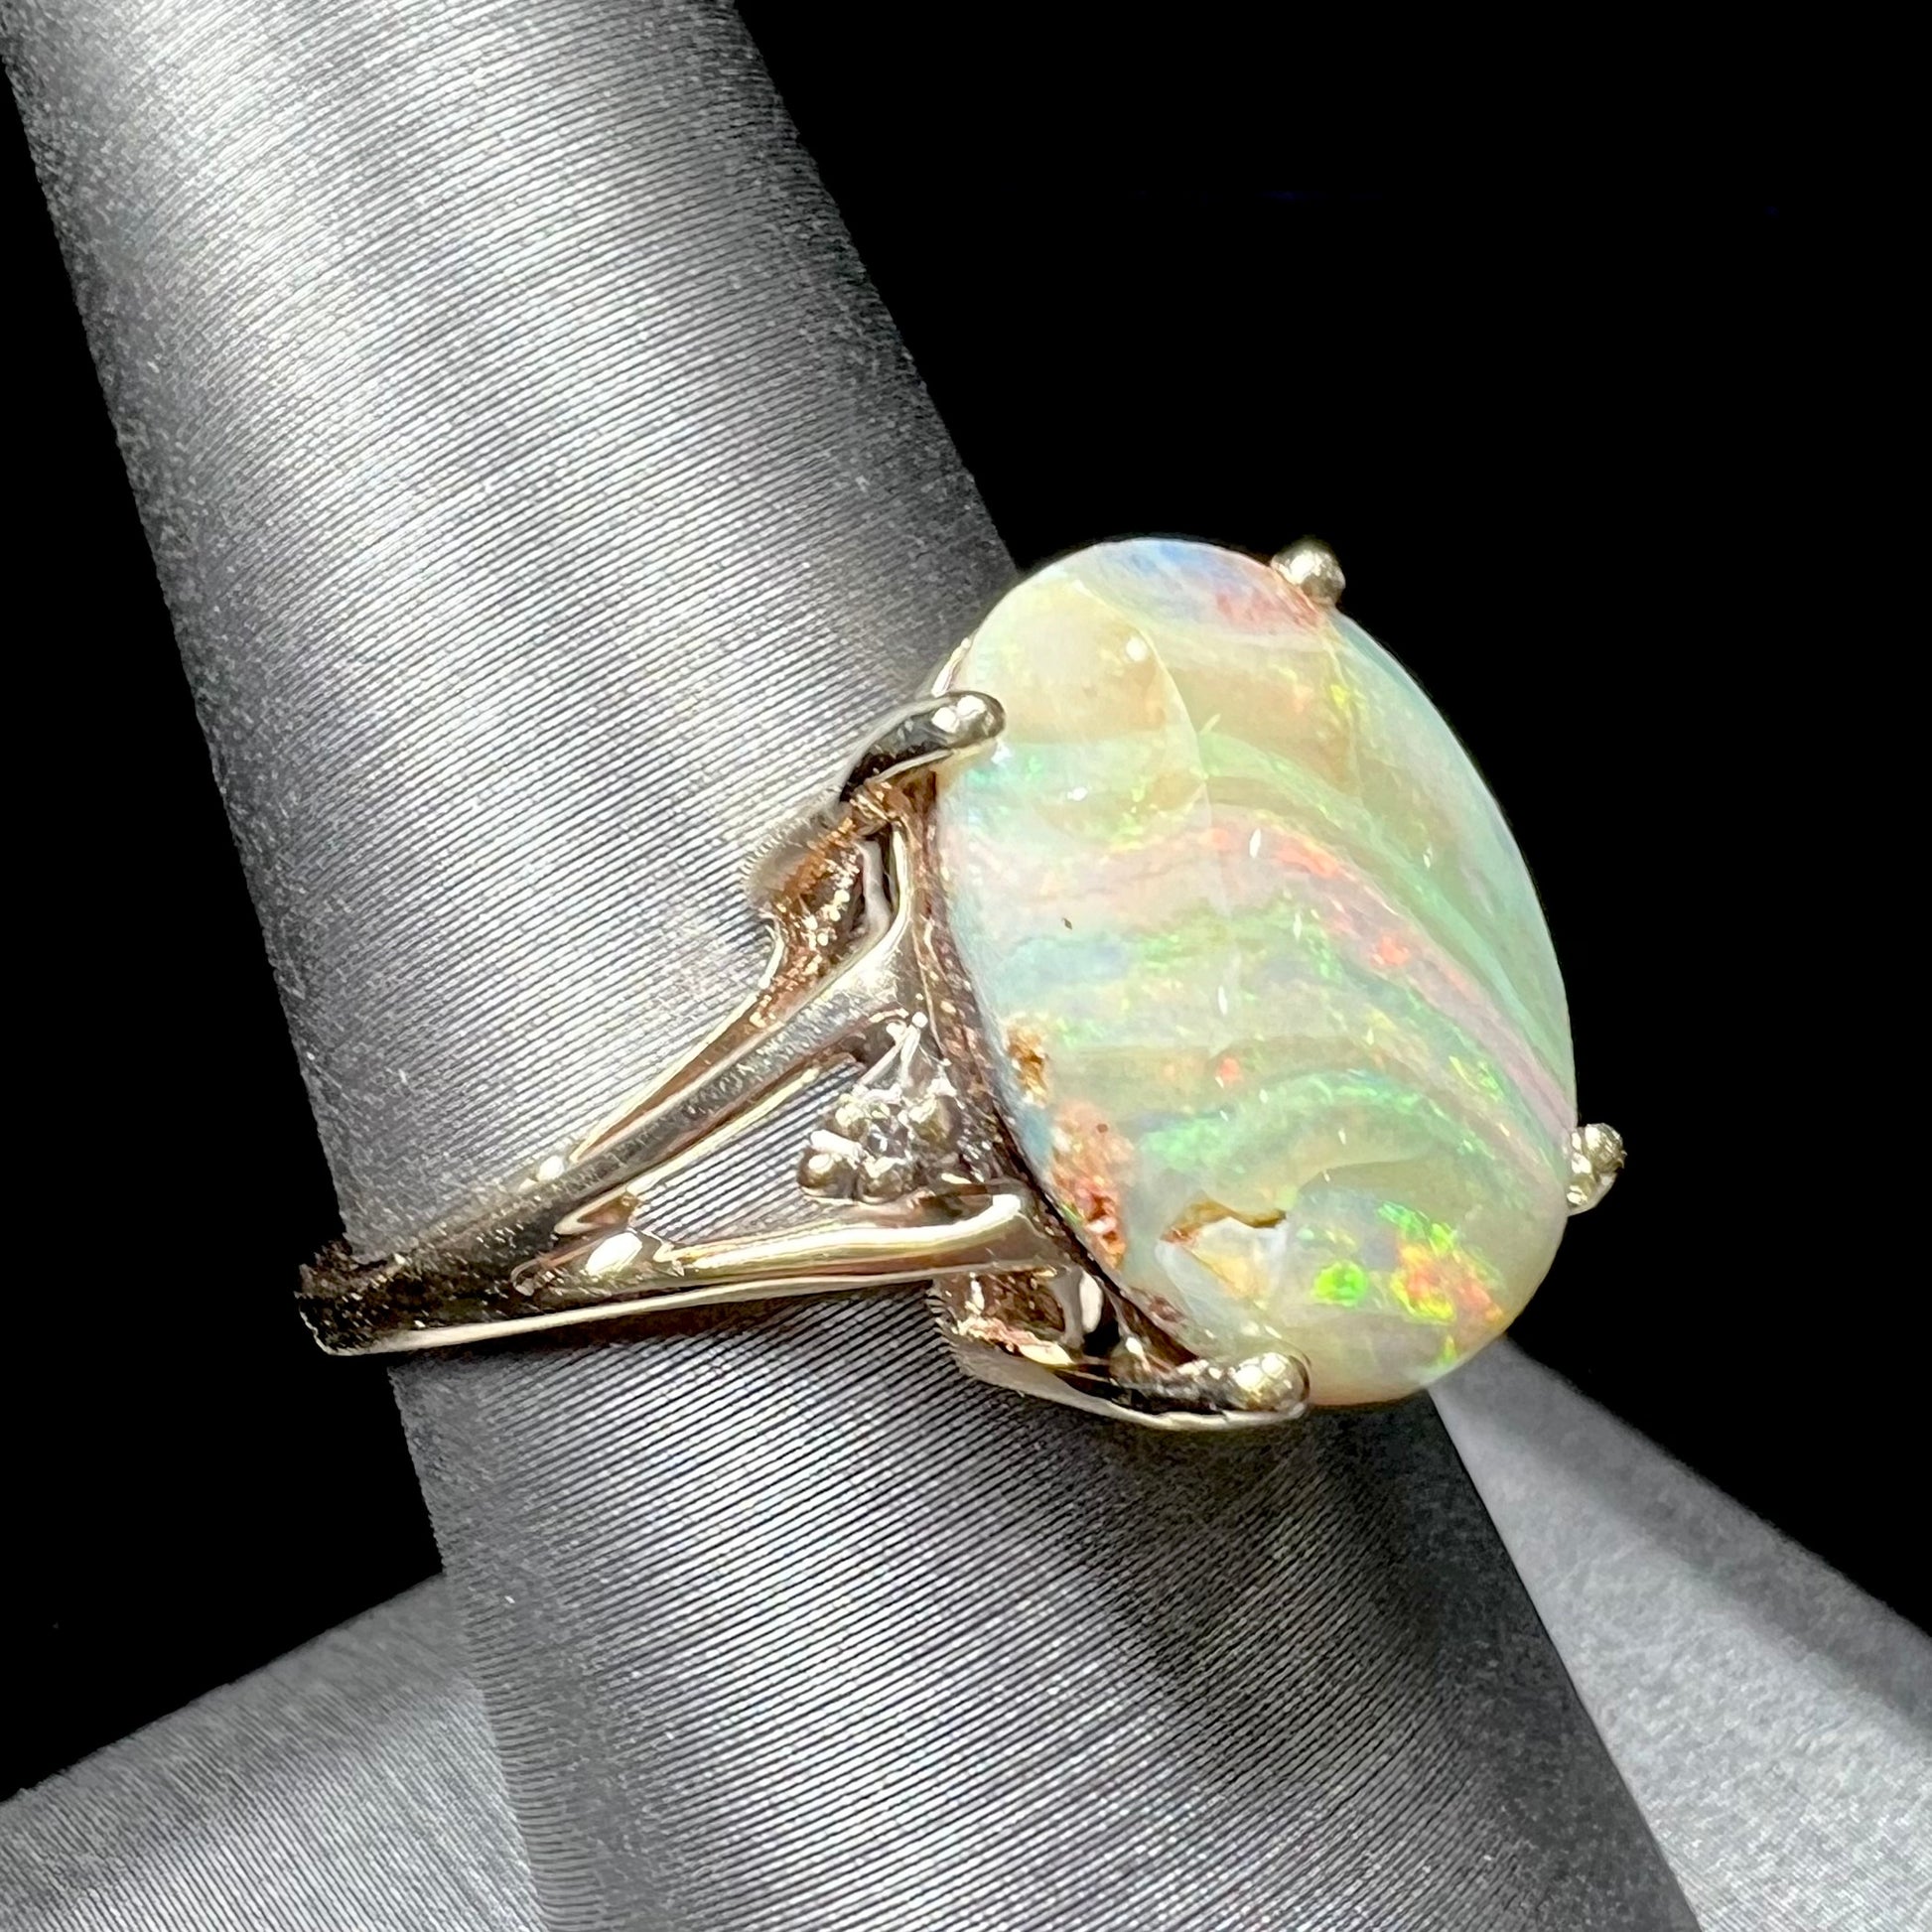 A ladies' Australian boulder opal ring set in yellow gold with diamond accents.  The opal shimmers green and pink and has fissure inclusions.